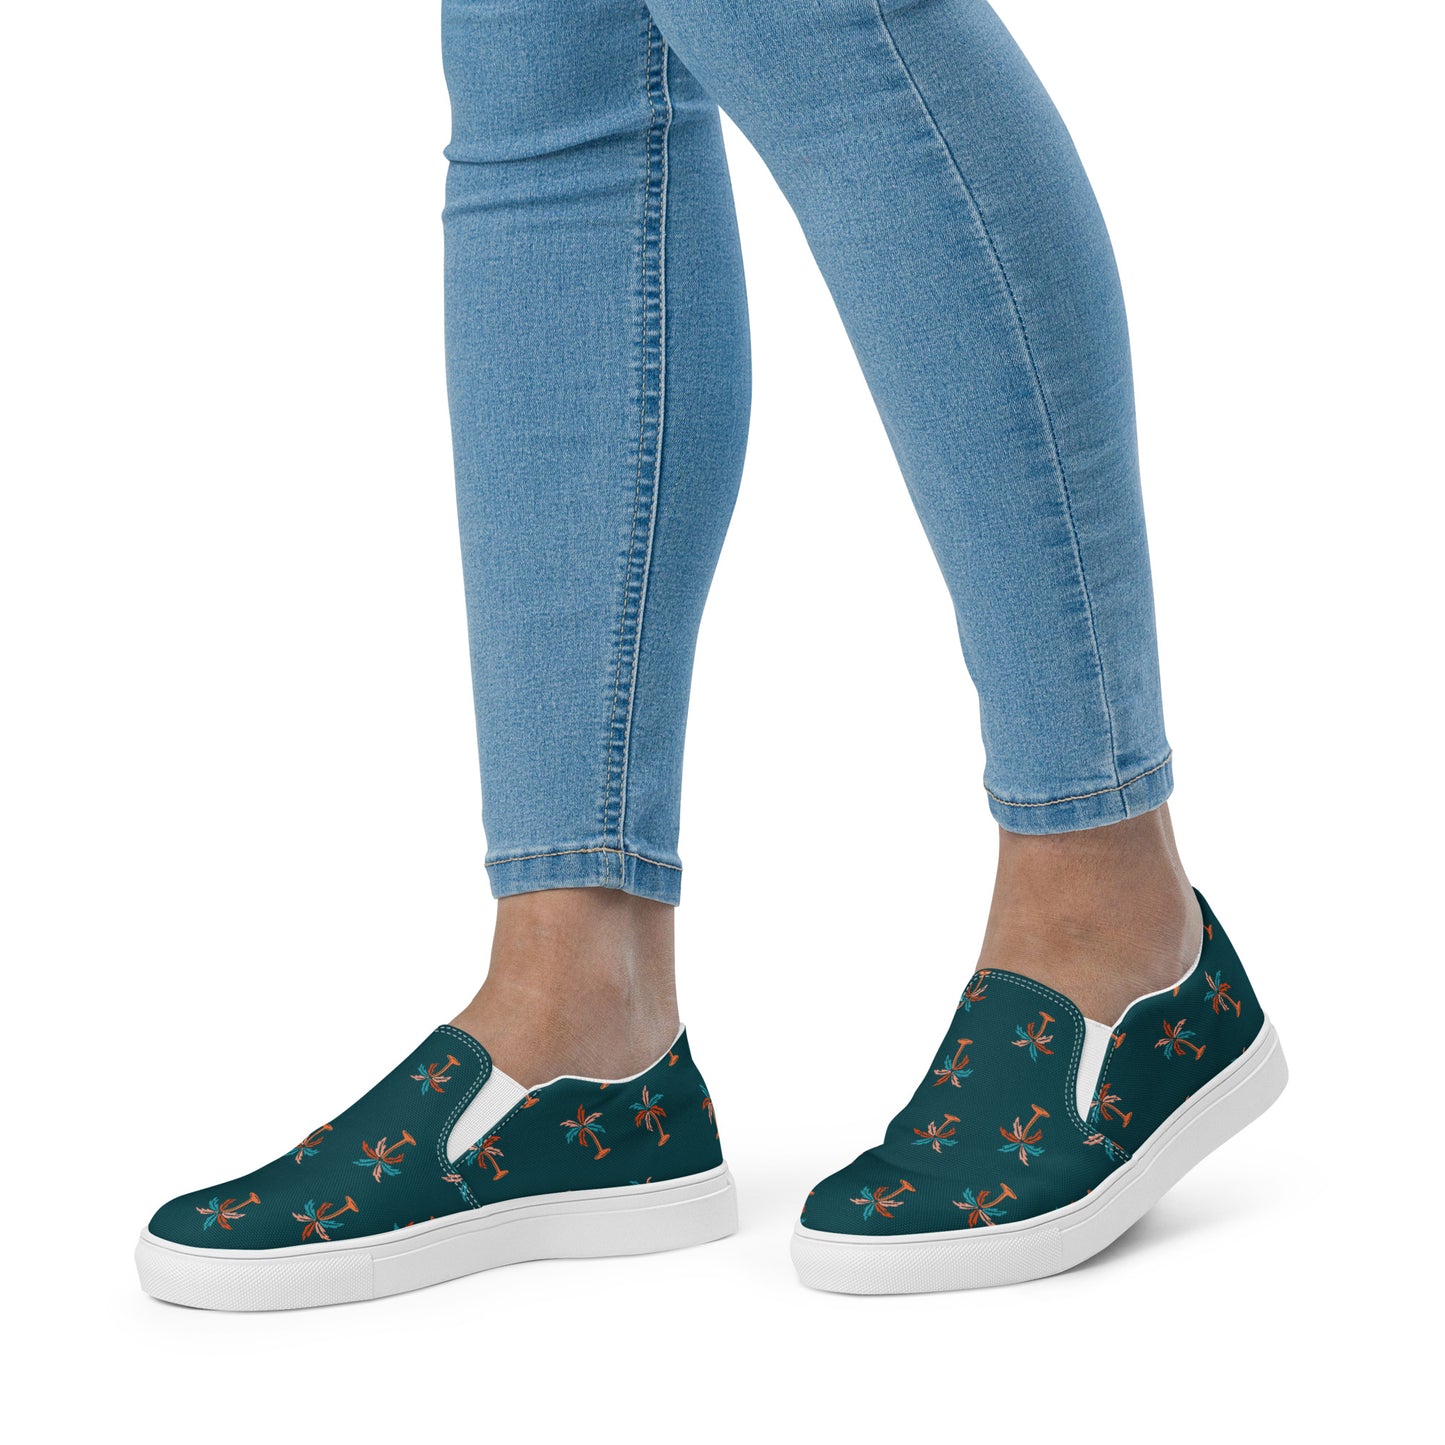 Women’s slip-on canvas shoes with Palm Trees Design, Women's casual summer shoes